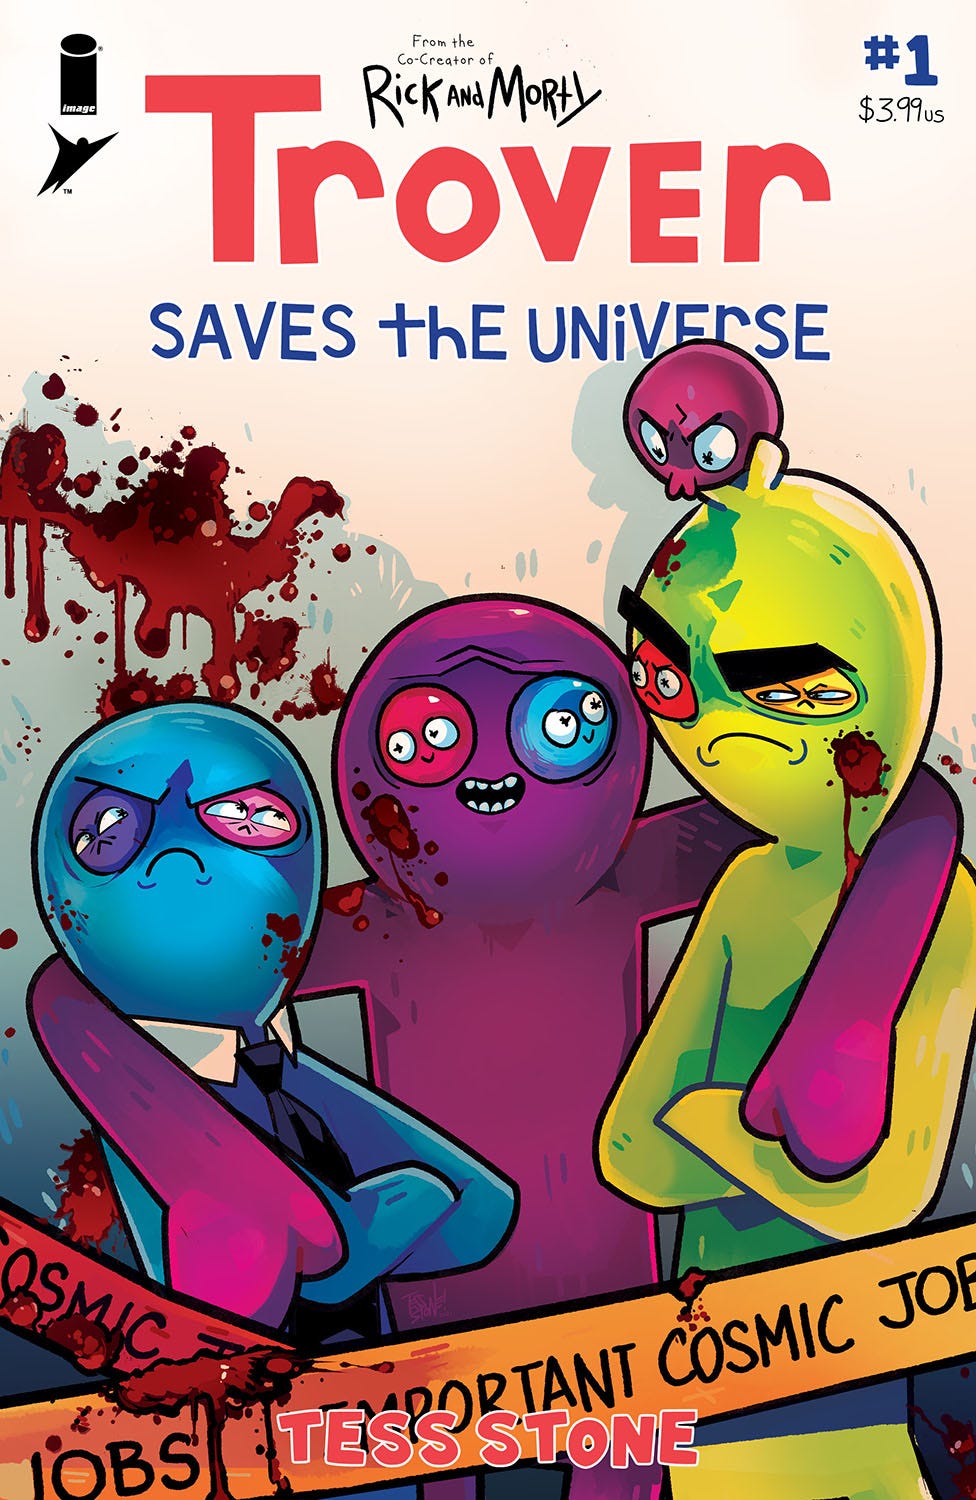 Trover Saves the Universe #1 (of 5) (Cover A - Stone)